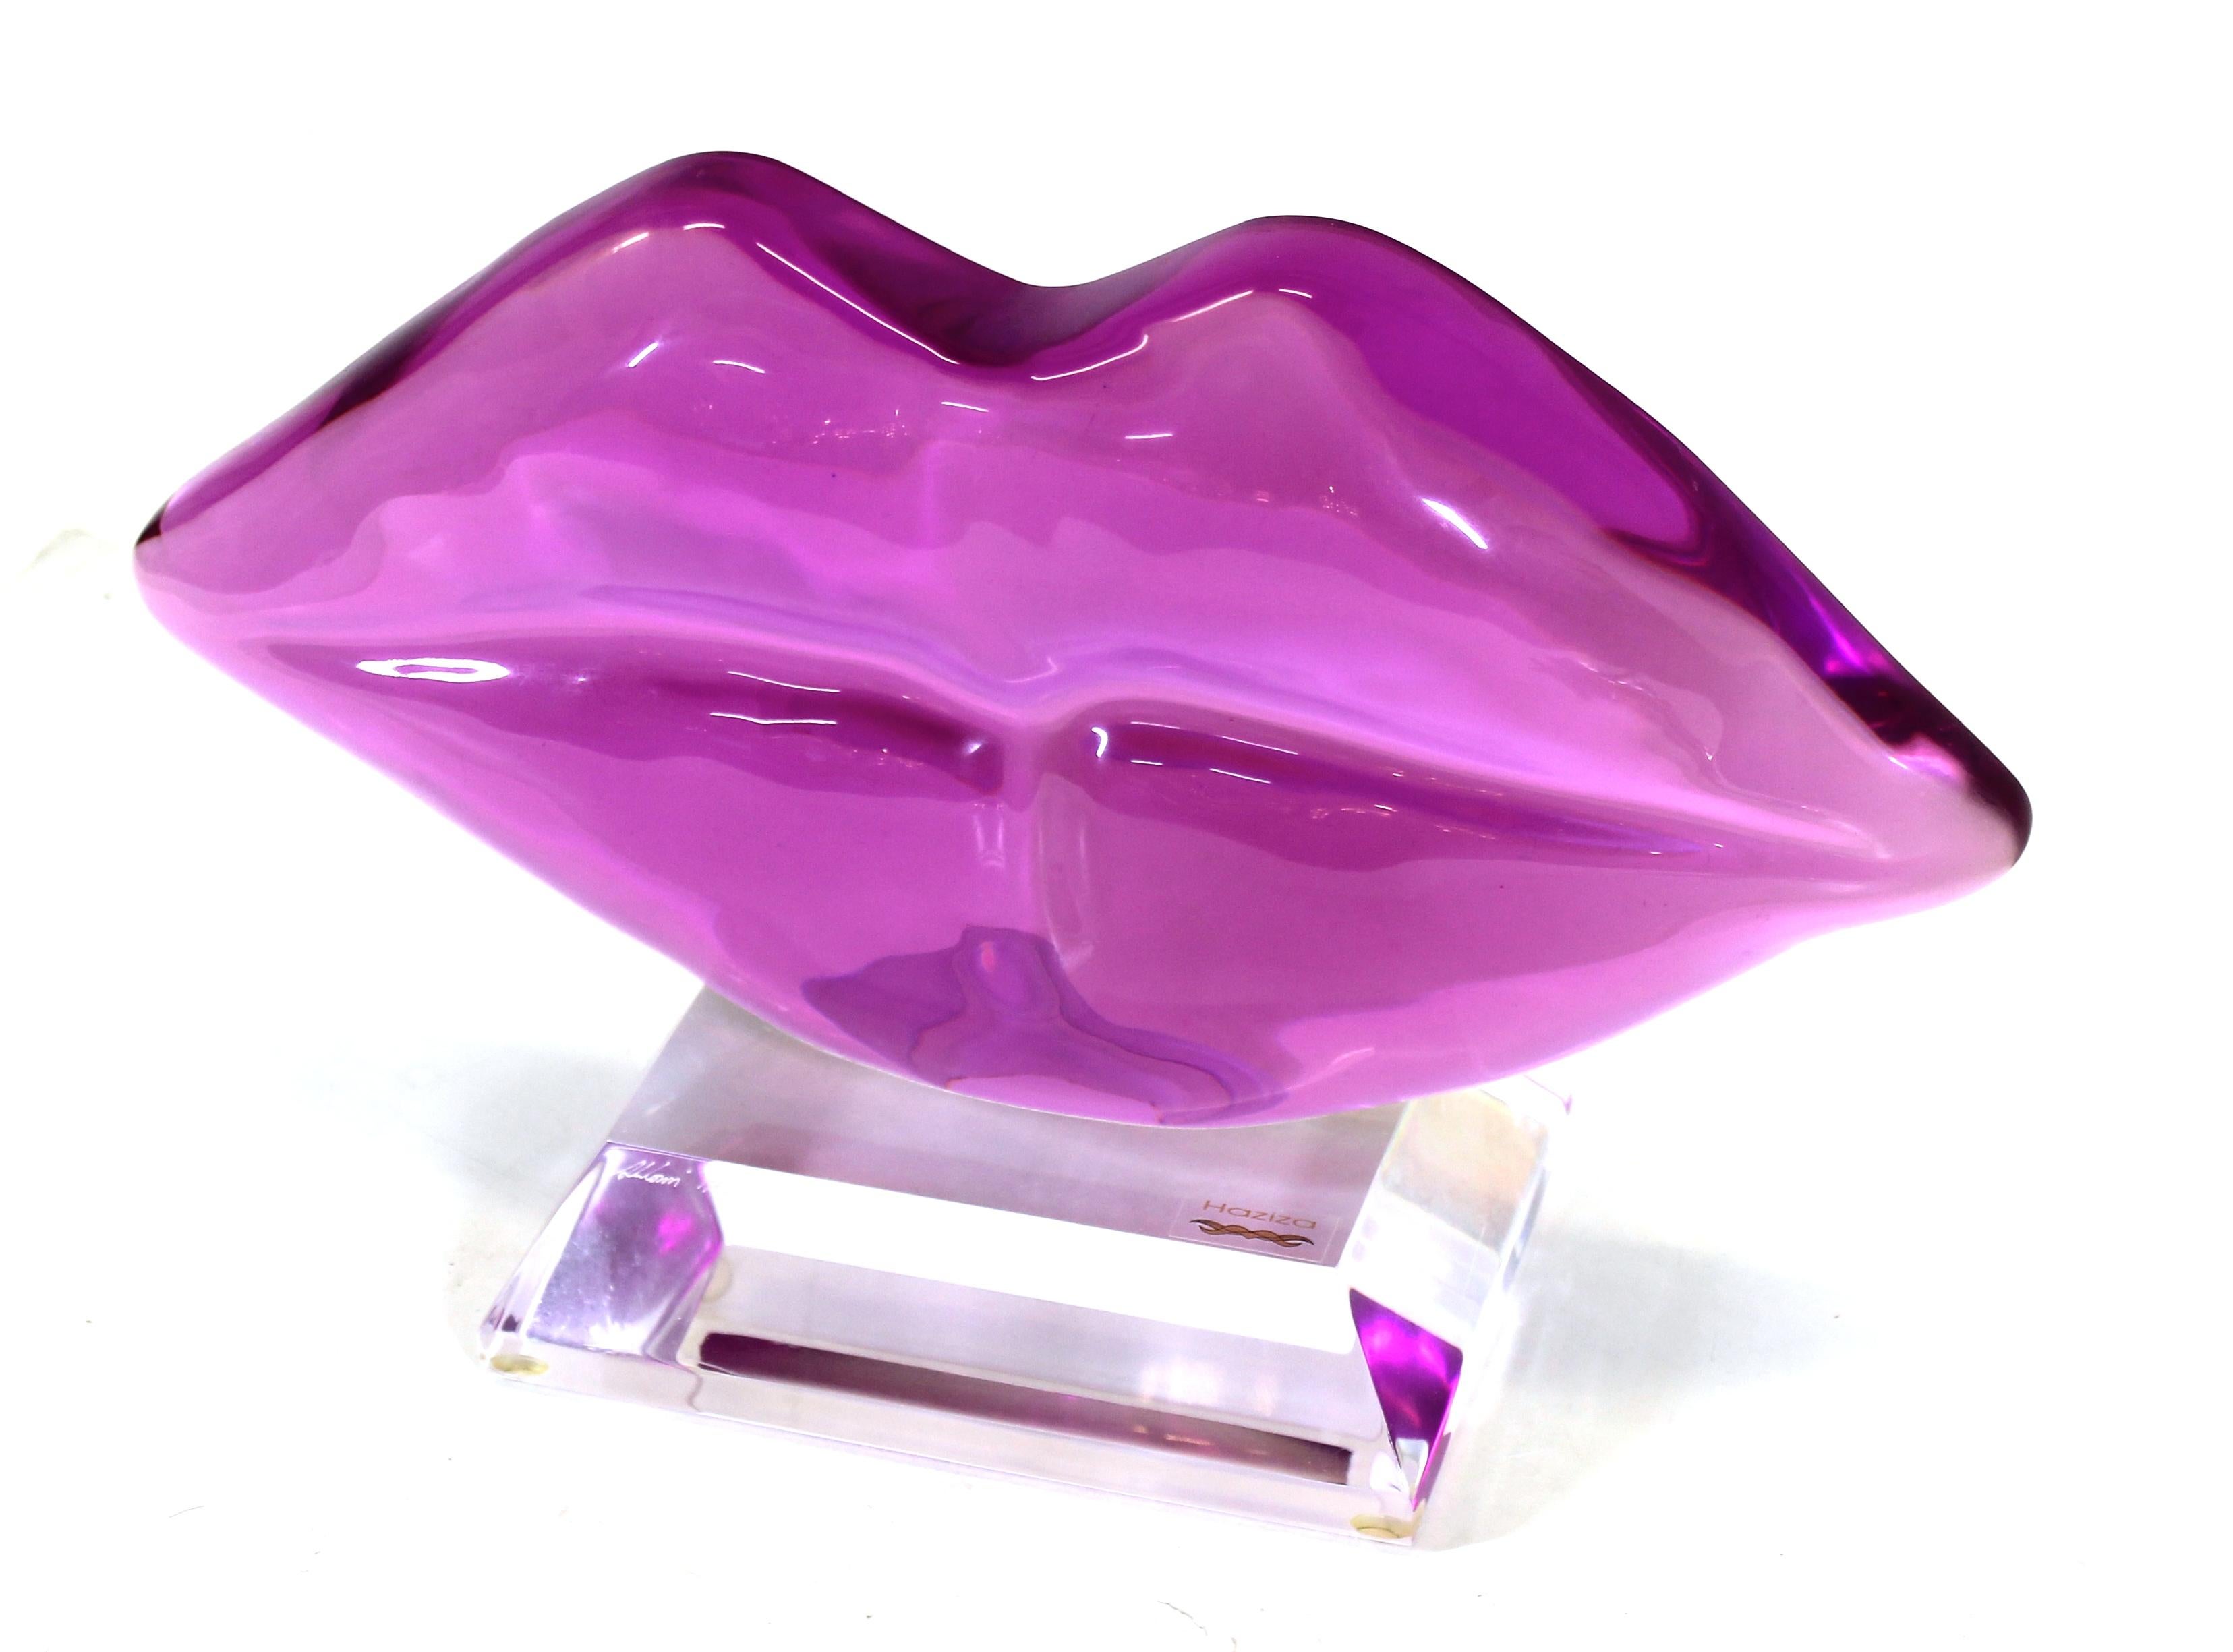 Shlomi Haziza Modern Lucite sculpture of a pair of fuchsia colored lips mounted on a Lucite base. The piece is incised 'Haziza' on the base and has a makers label on the front. Made in the 1990's.